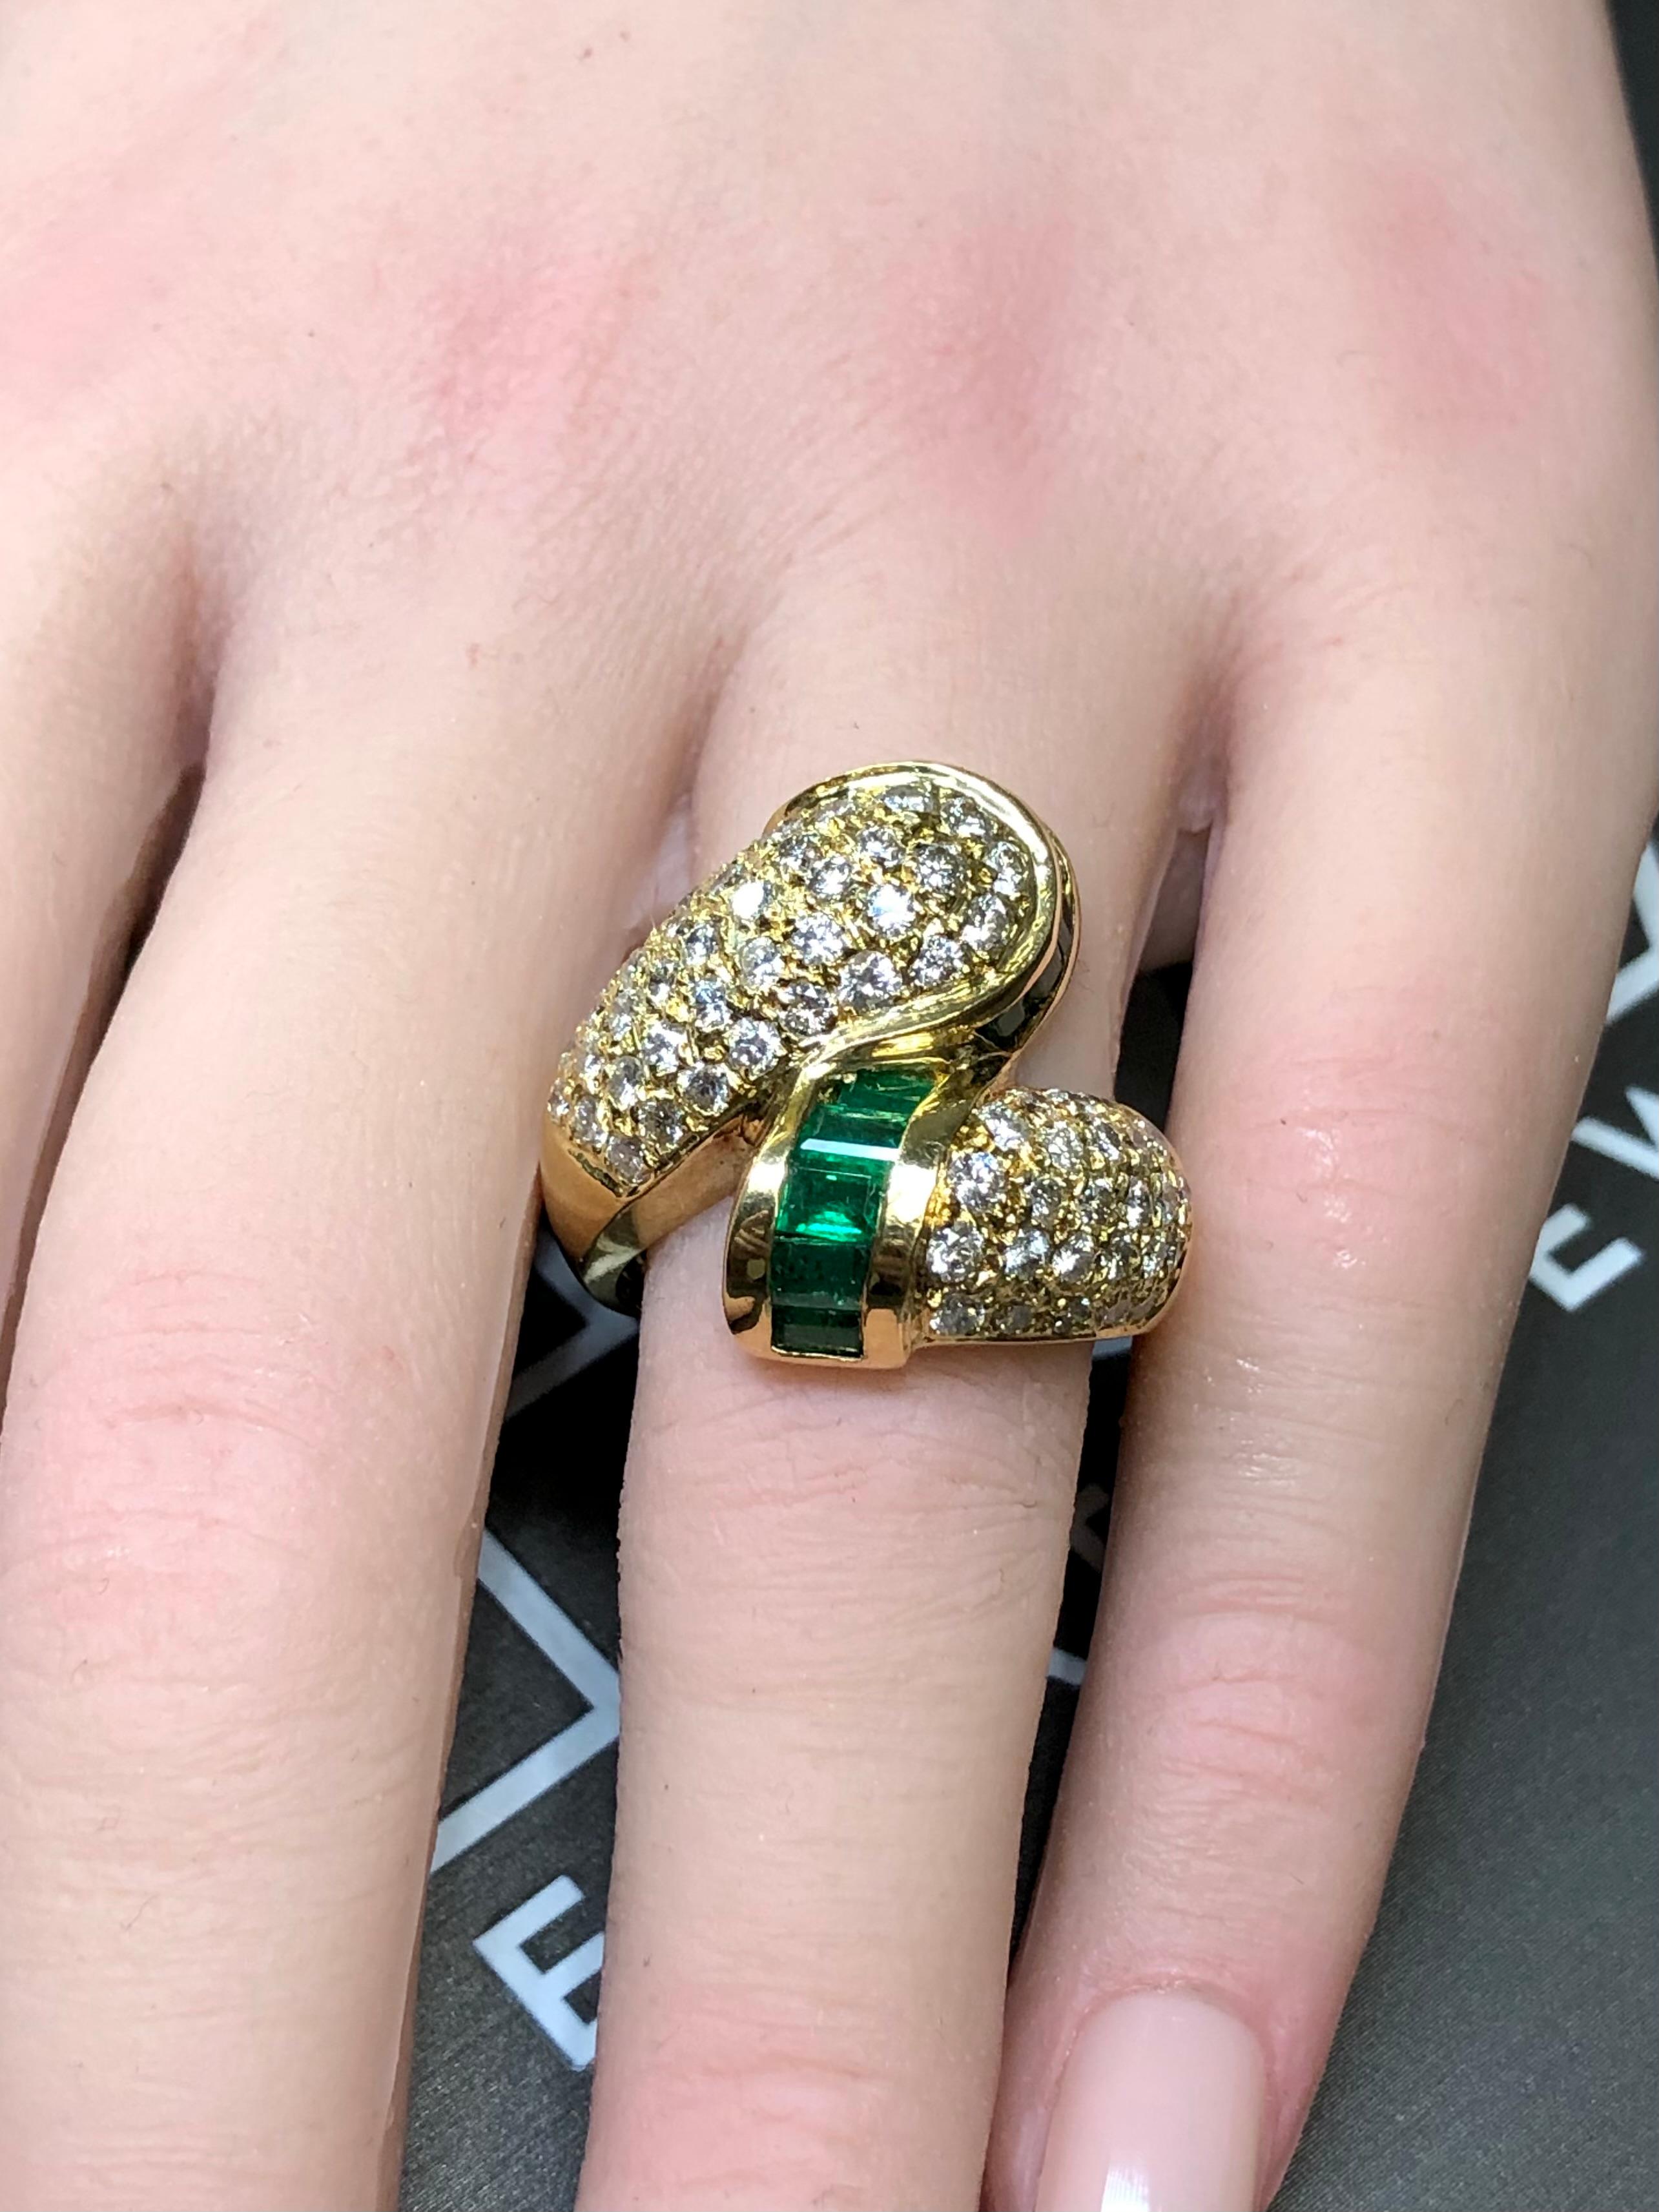 Vintage 18K Emerald Pave Diamond Bypass Large Cocktail Ring 4.30cttw Sz 7.75 For Sale 6